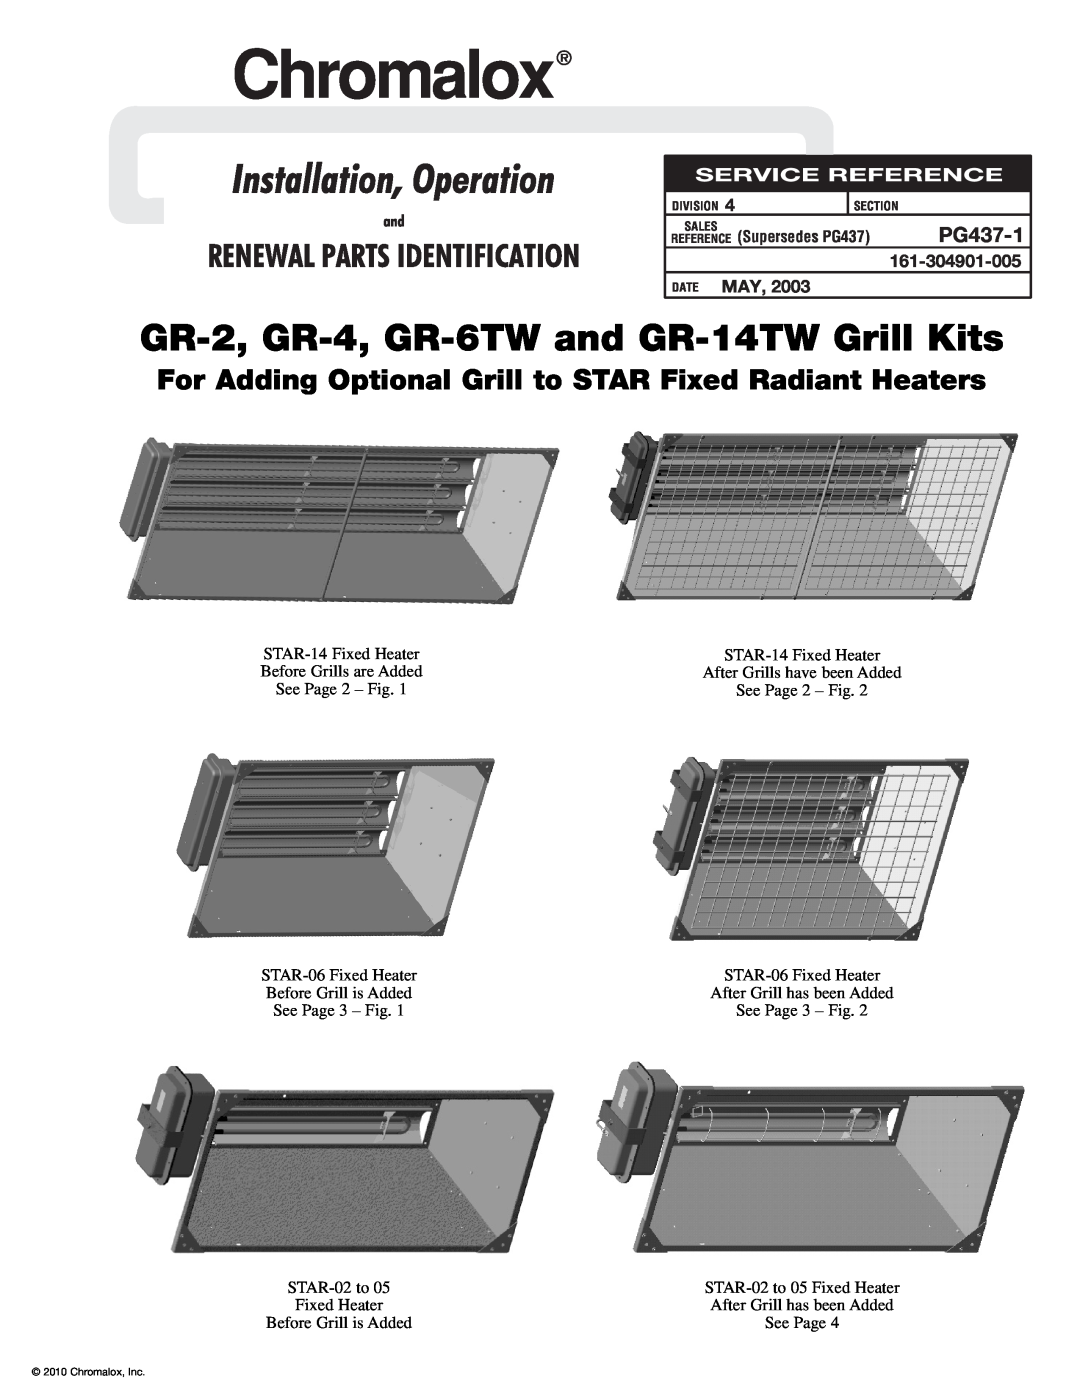 Chromalox manual PG437-1, 161-304901-005, Date May, Chromalox, GR-2, GR-4, GR-6TW and GR-14TW Grill Kits 